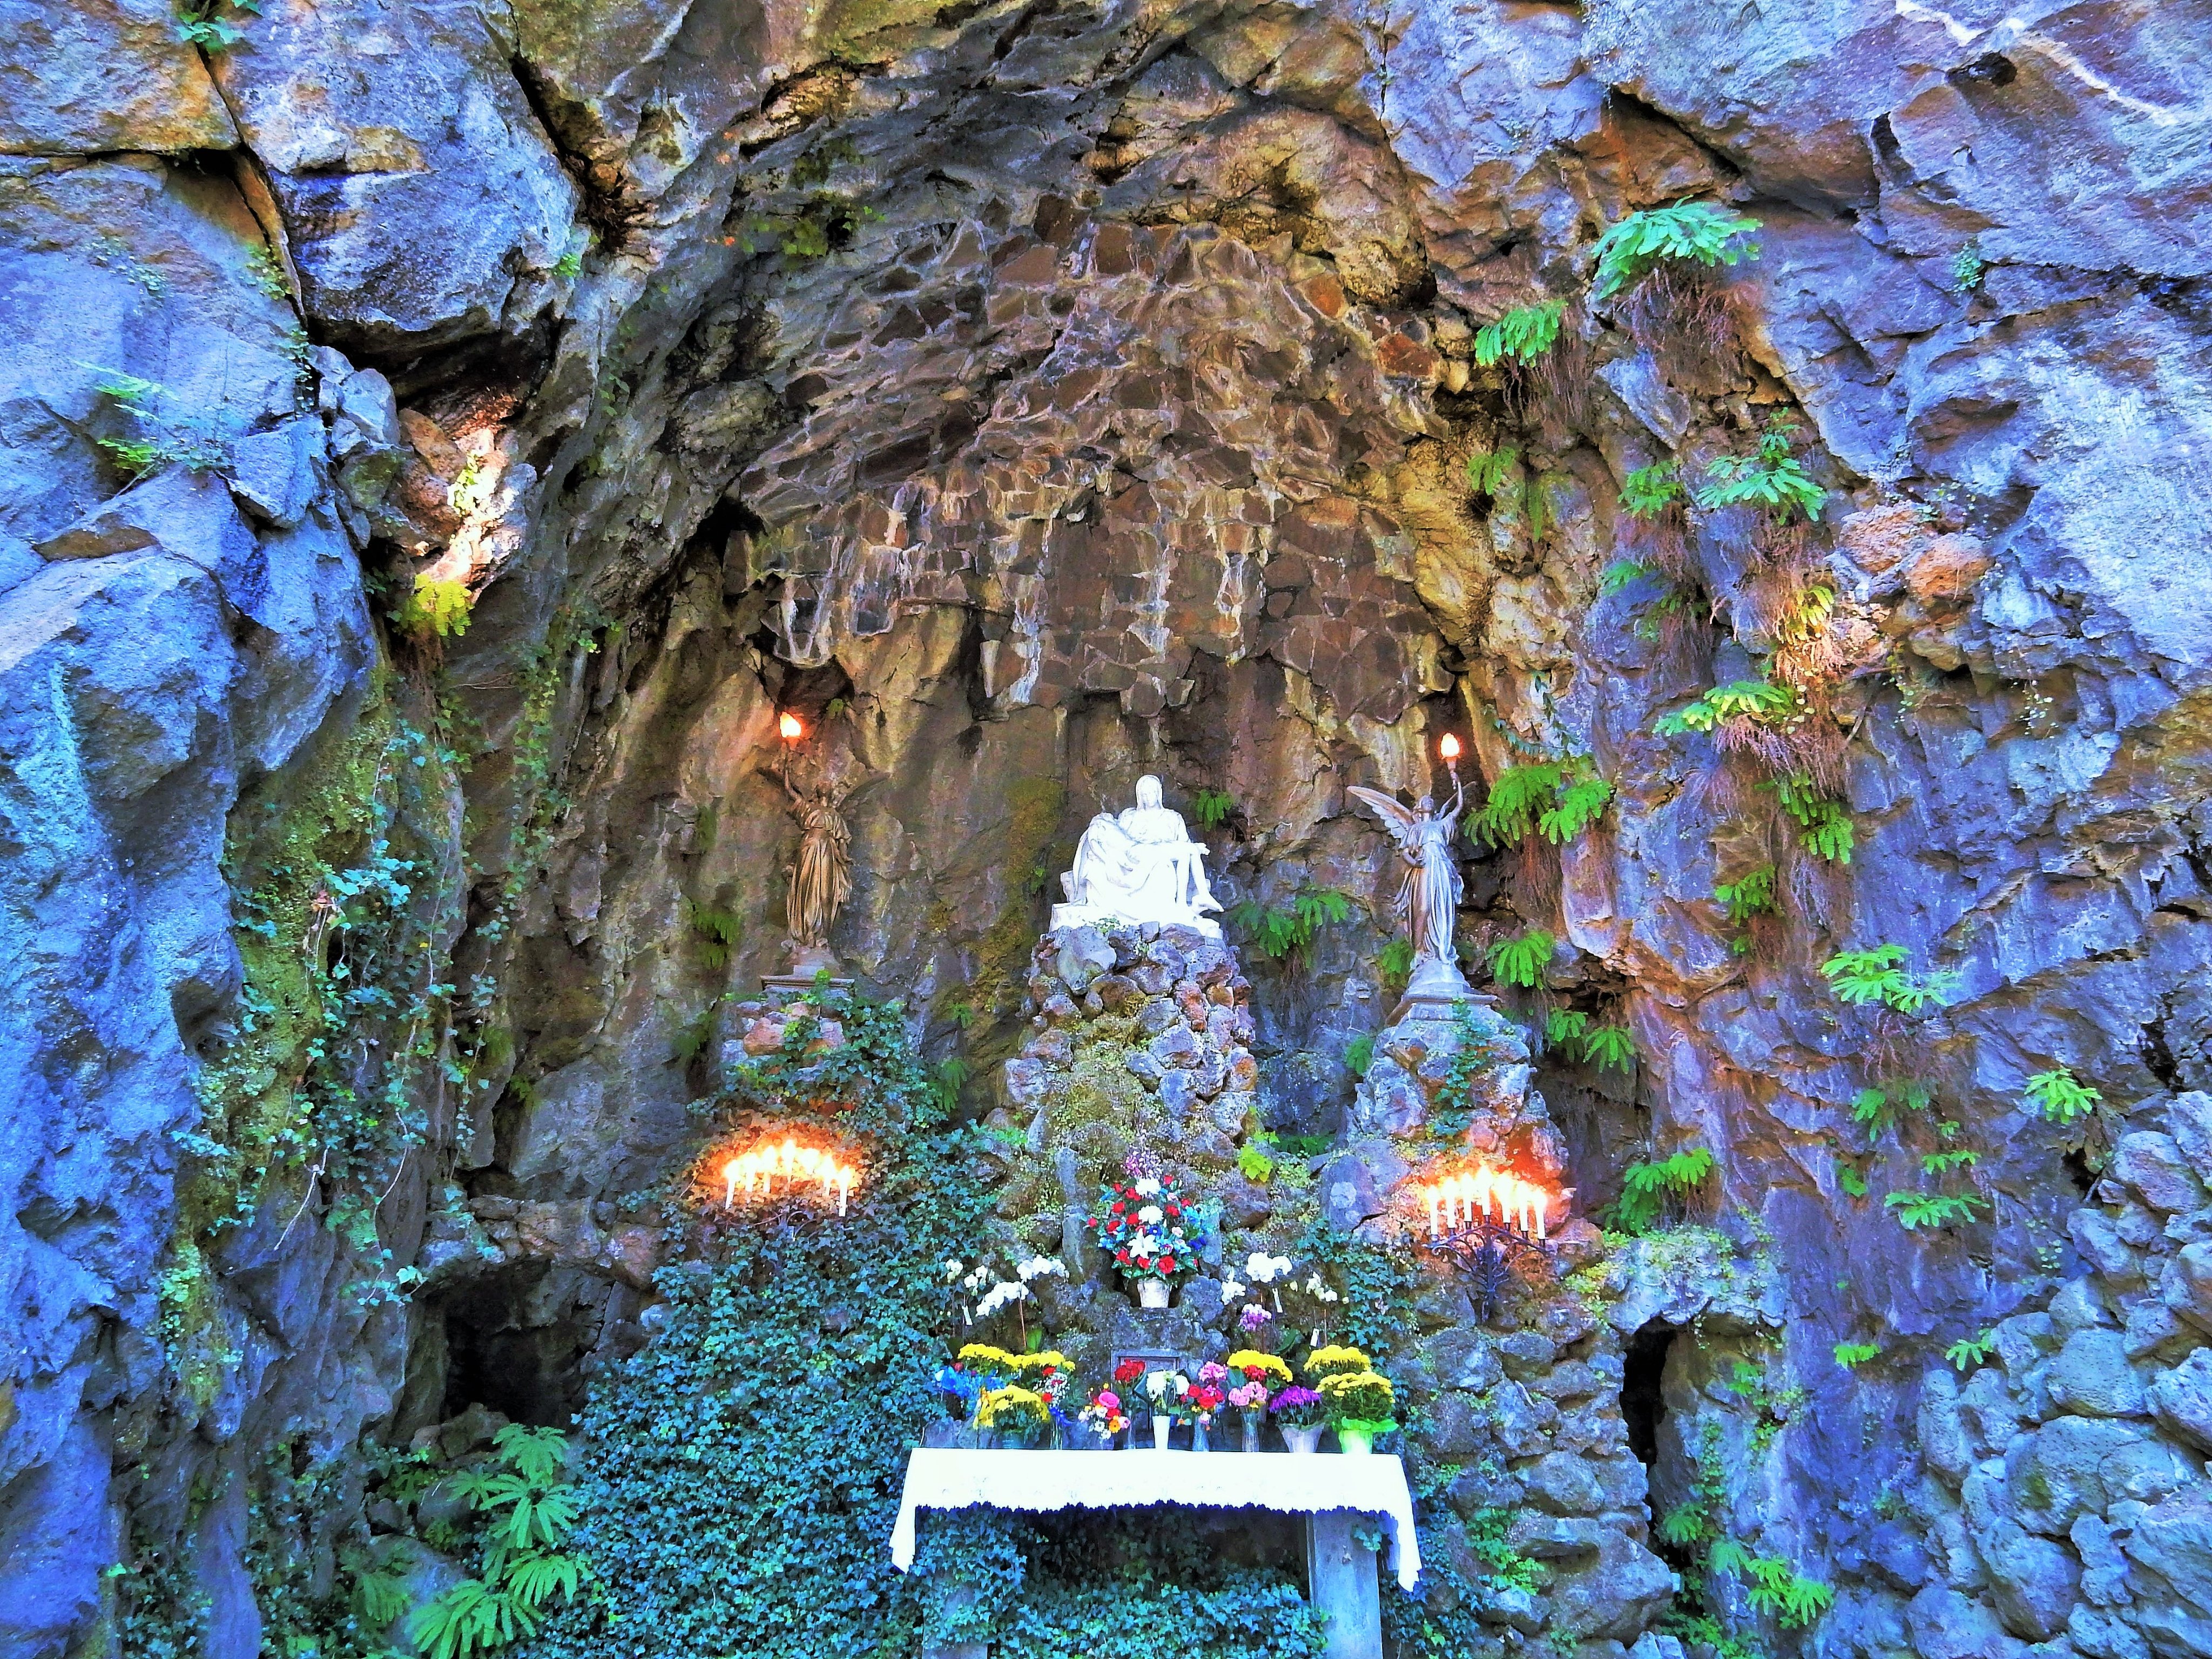 The Grotto!